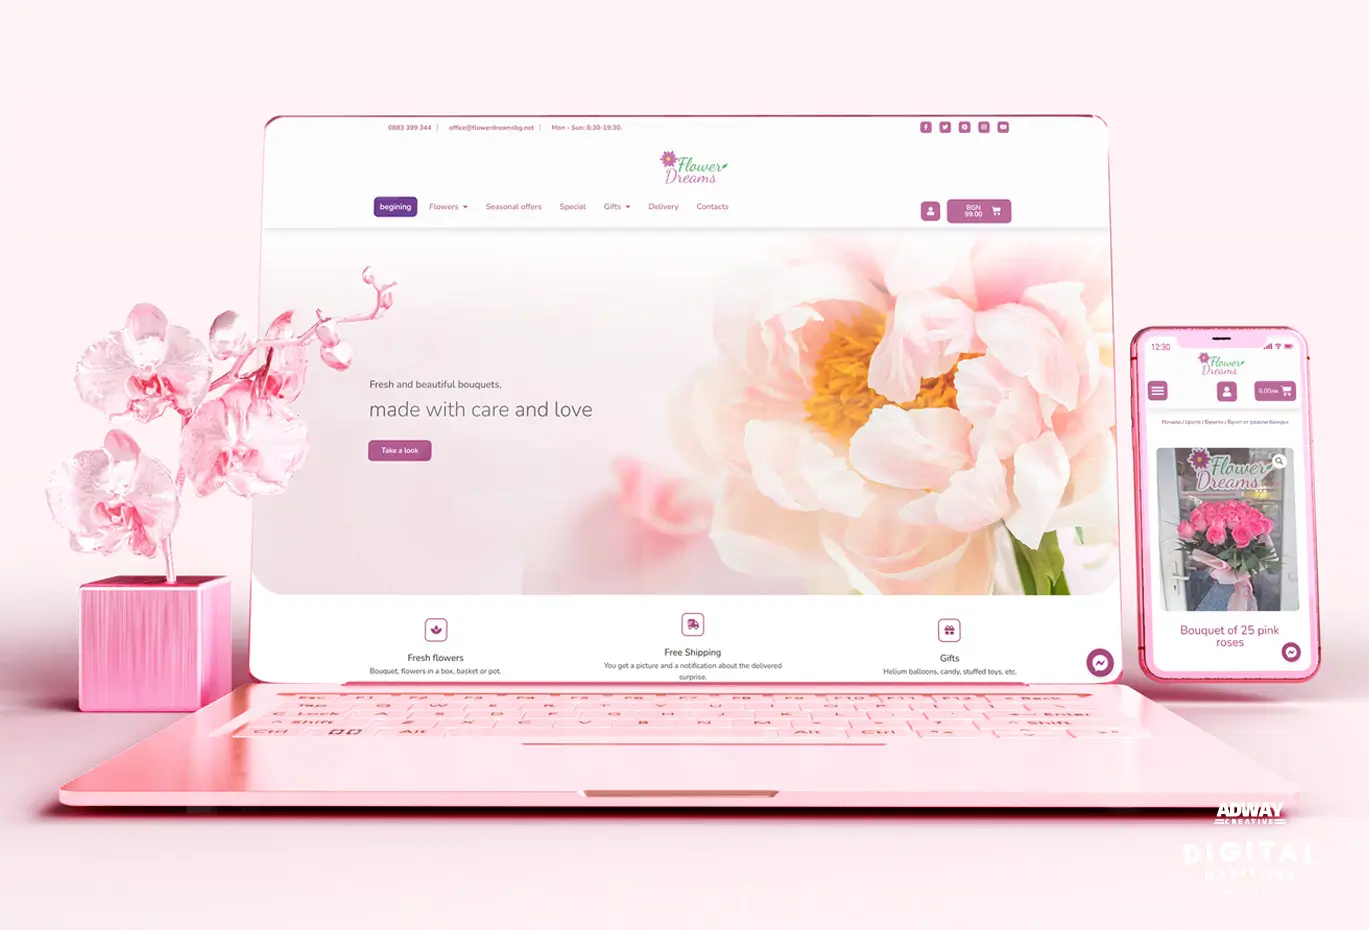 FlowerDreams Used Our Website Redesign Services For Their Ecommerce Shop